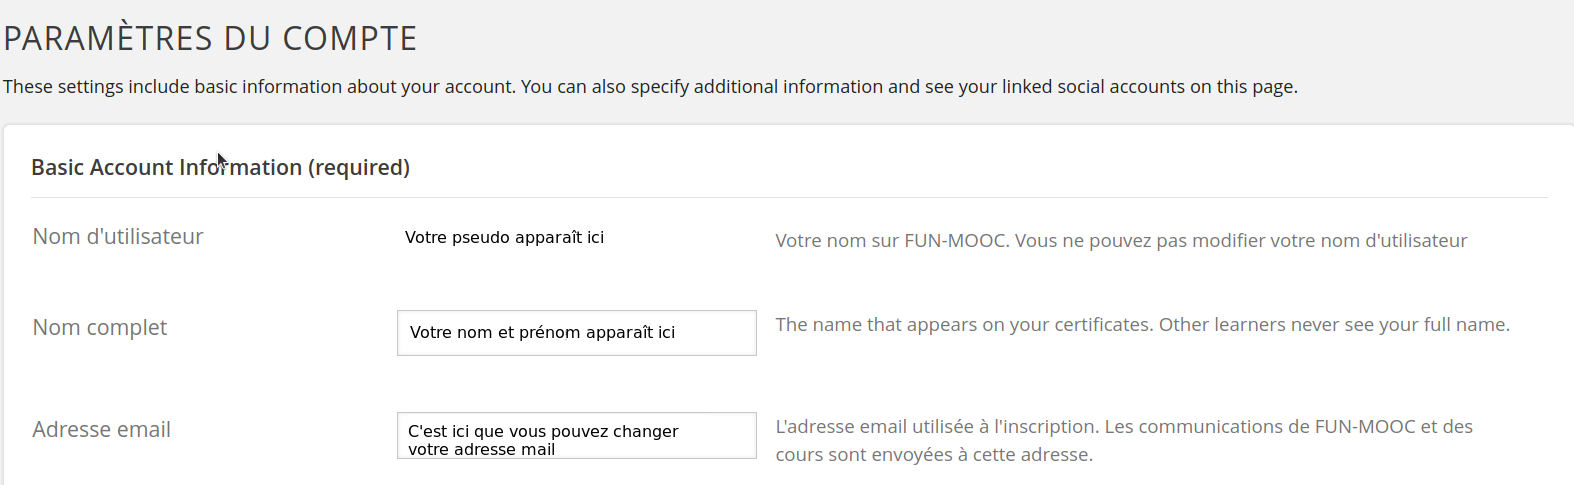 Localisation_adresse_mail_FUN.png